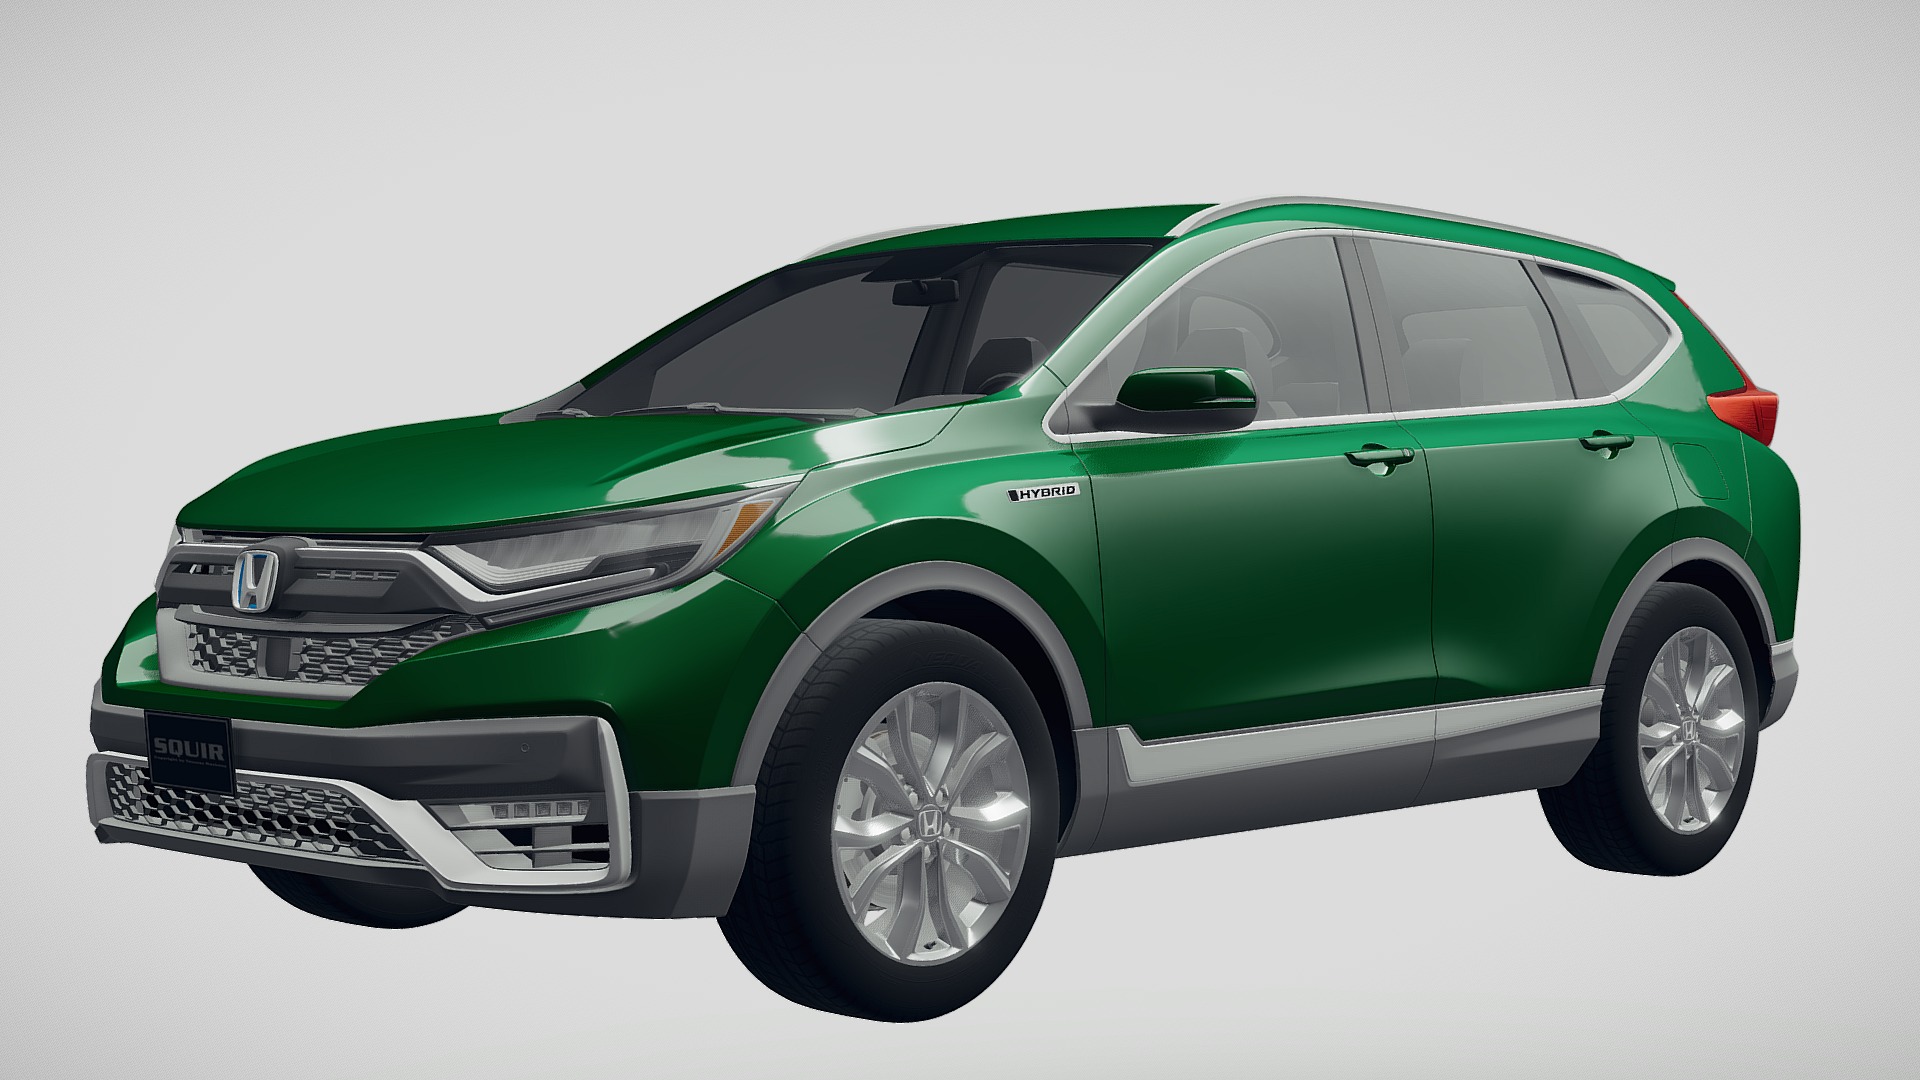 3D model Honda CR-V 2020 - This is a 3D model of the Honda CR-V 2020. The 3D model is about a green car with a white background.